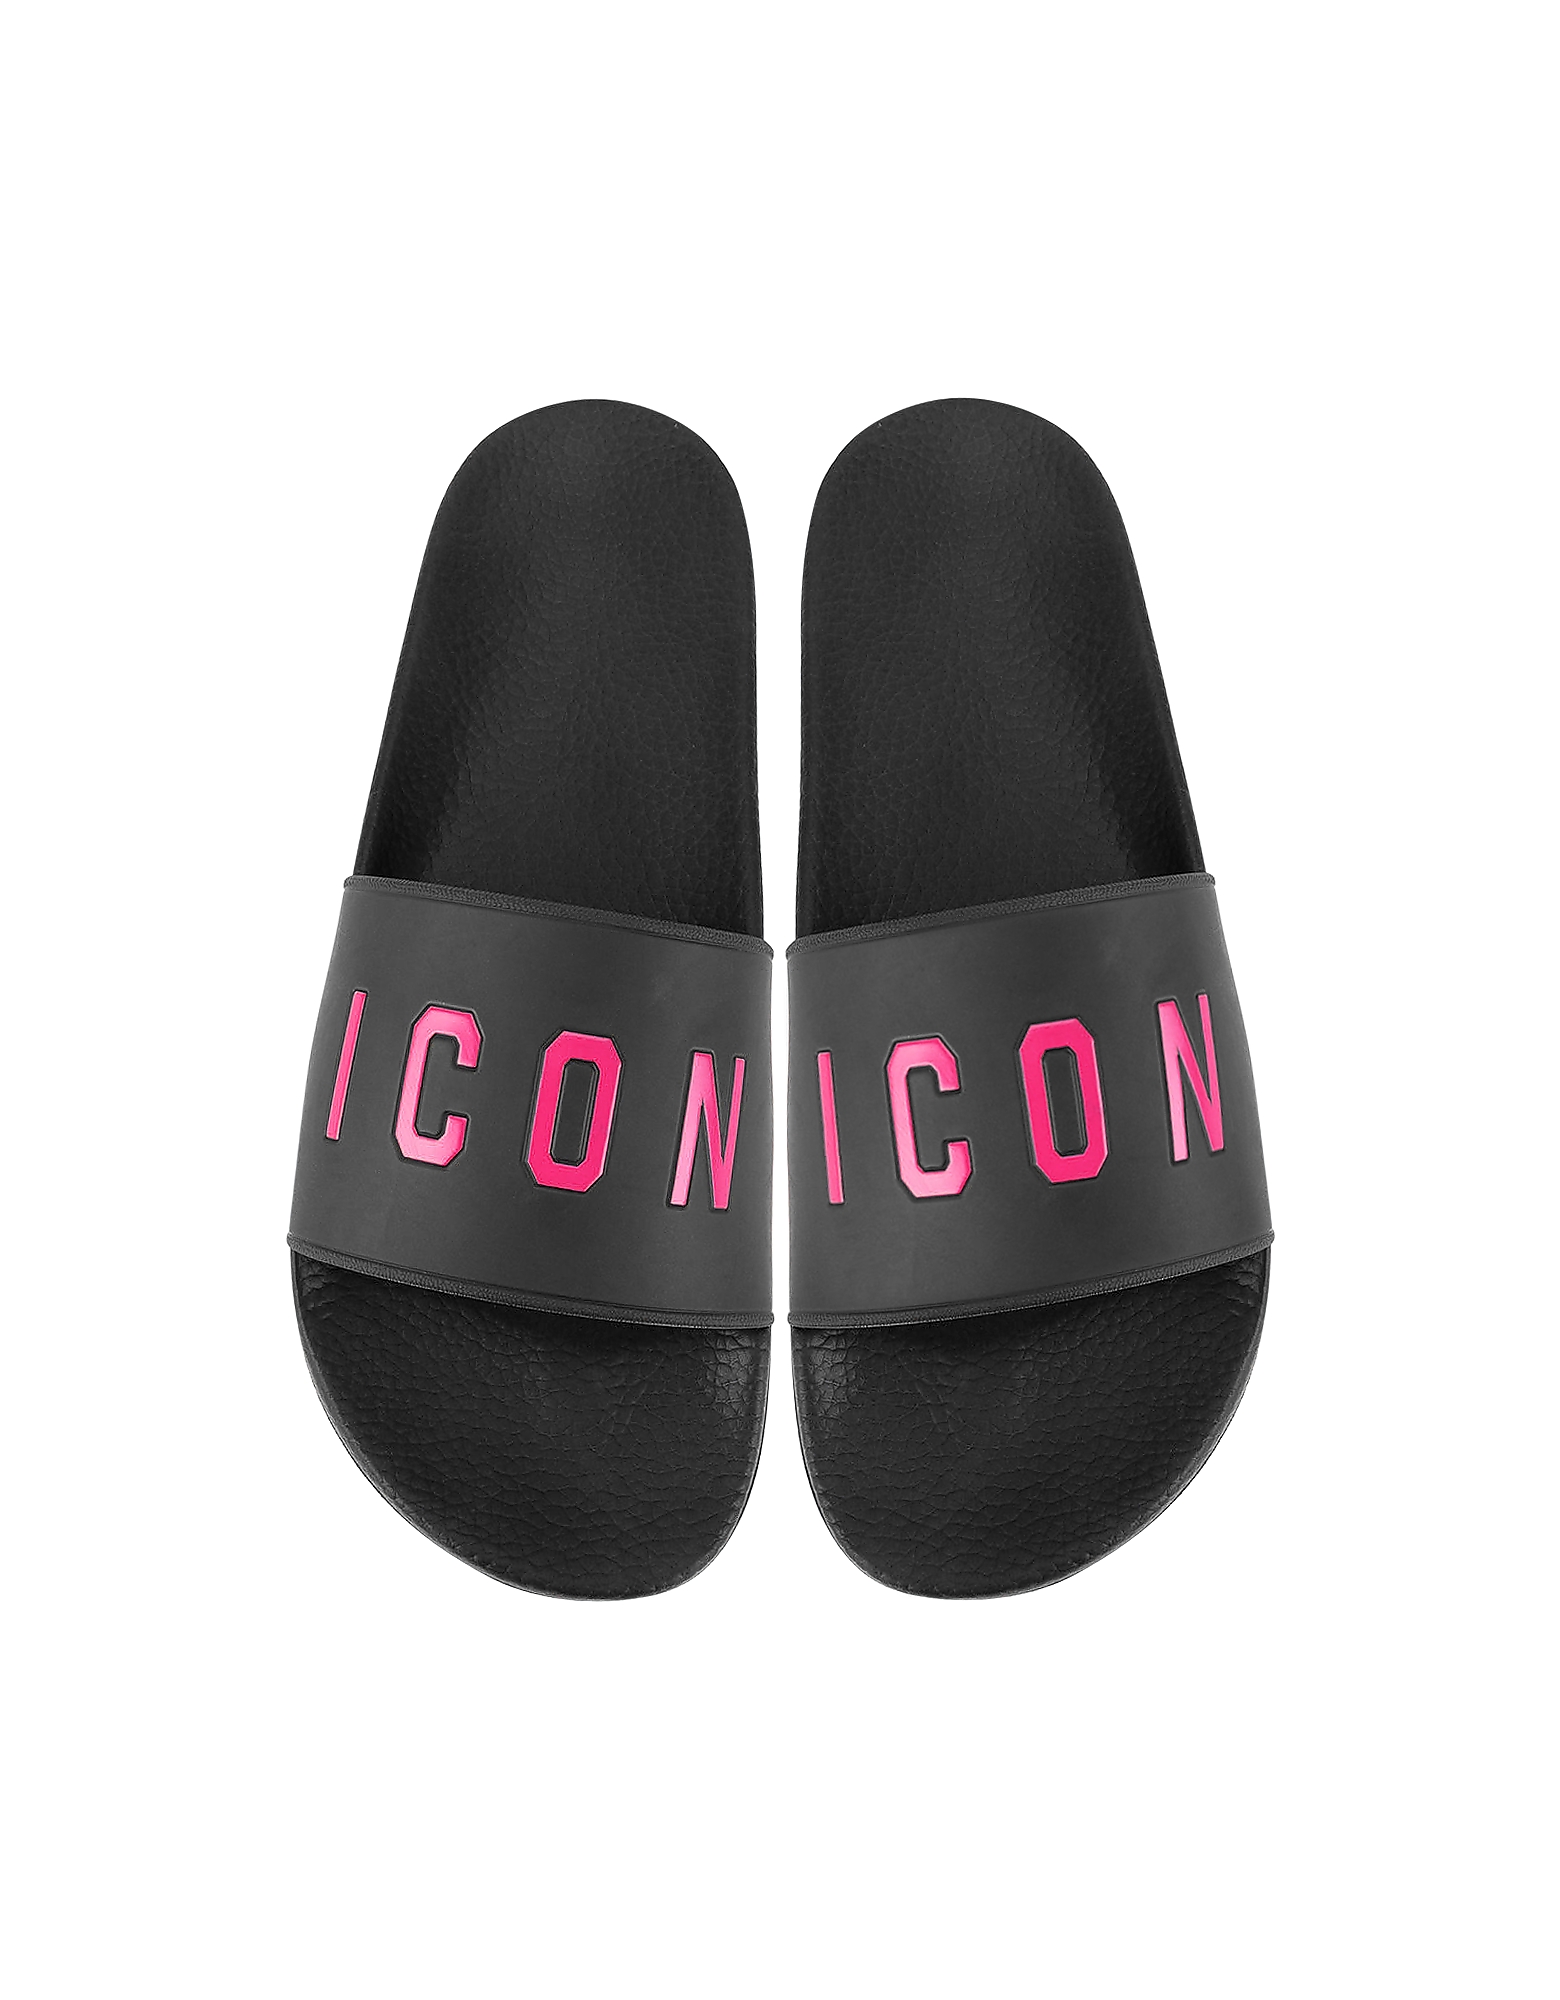 DSquared2 Black and Fuchsia Icon Women's Flip Flop Pool Sandals